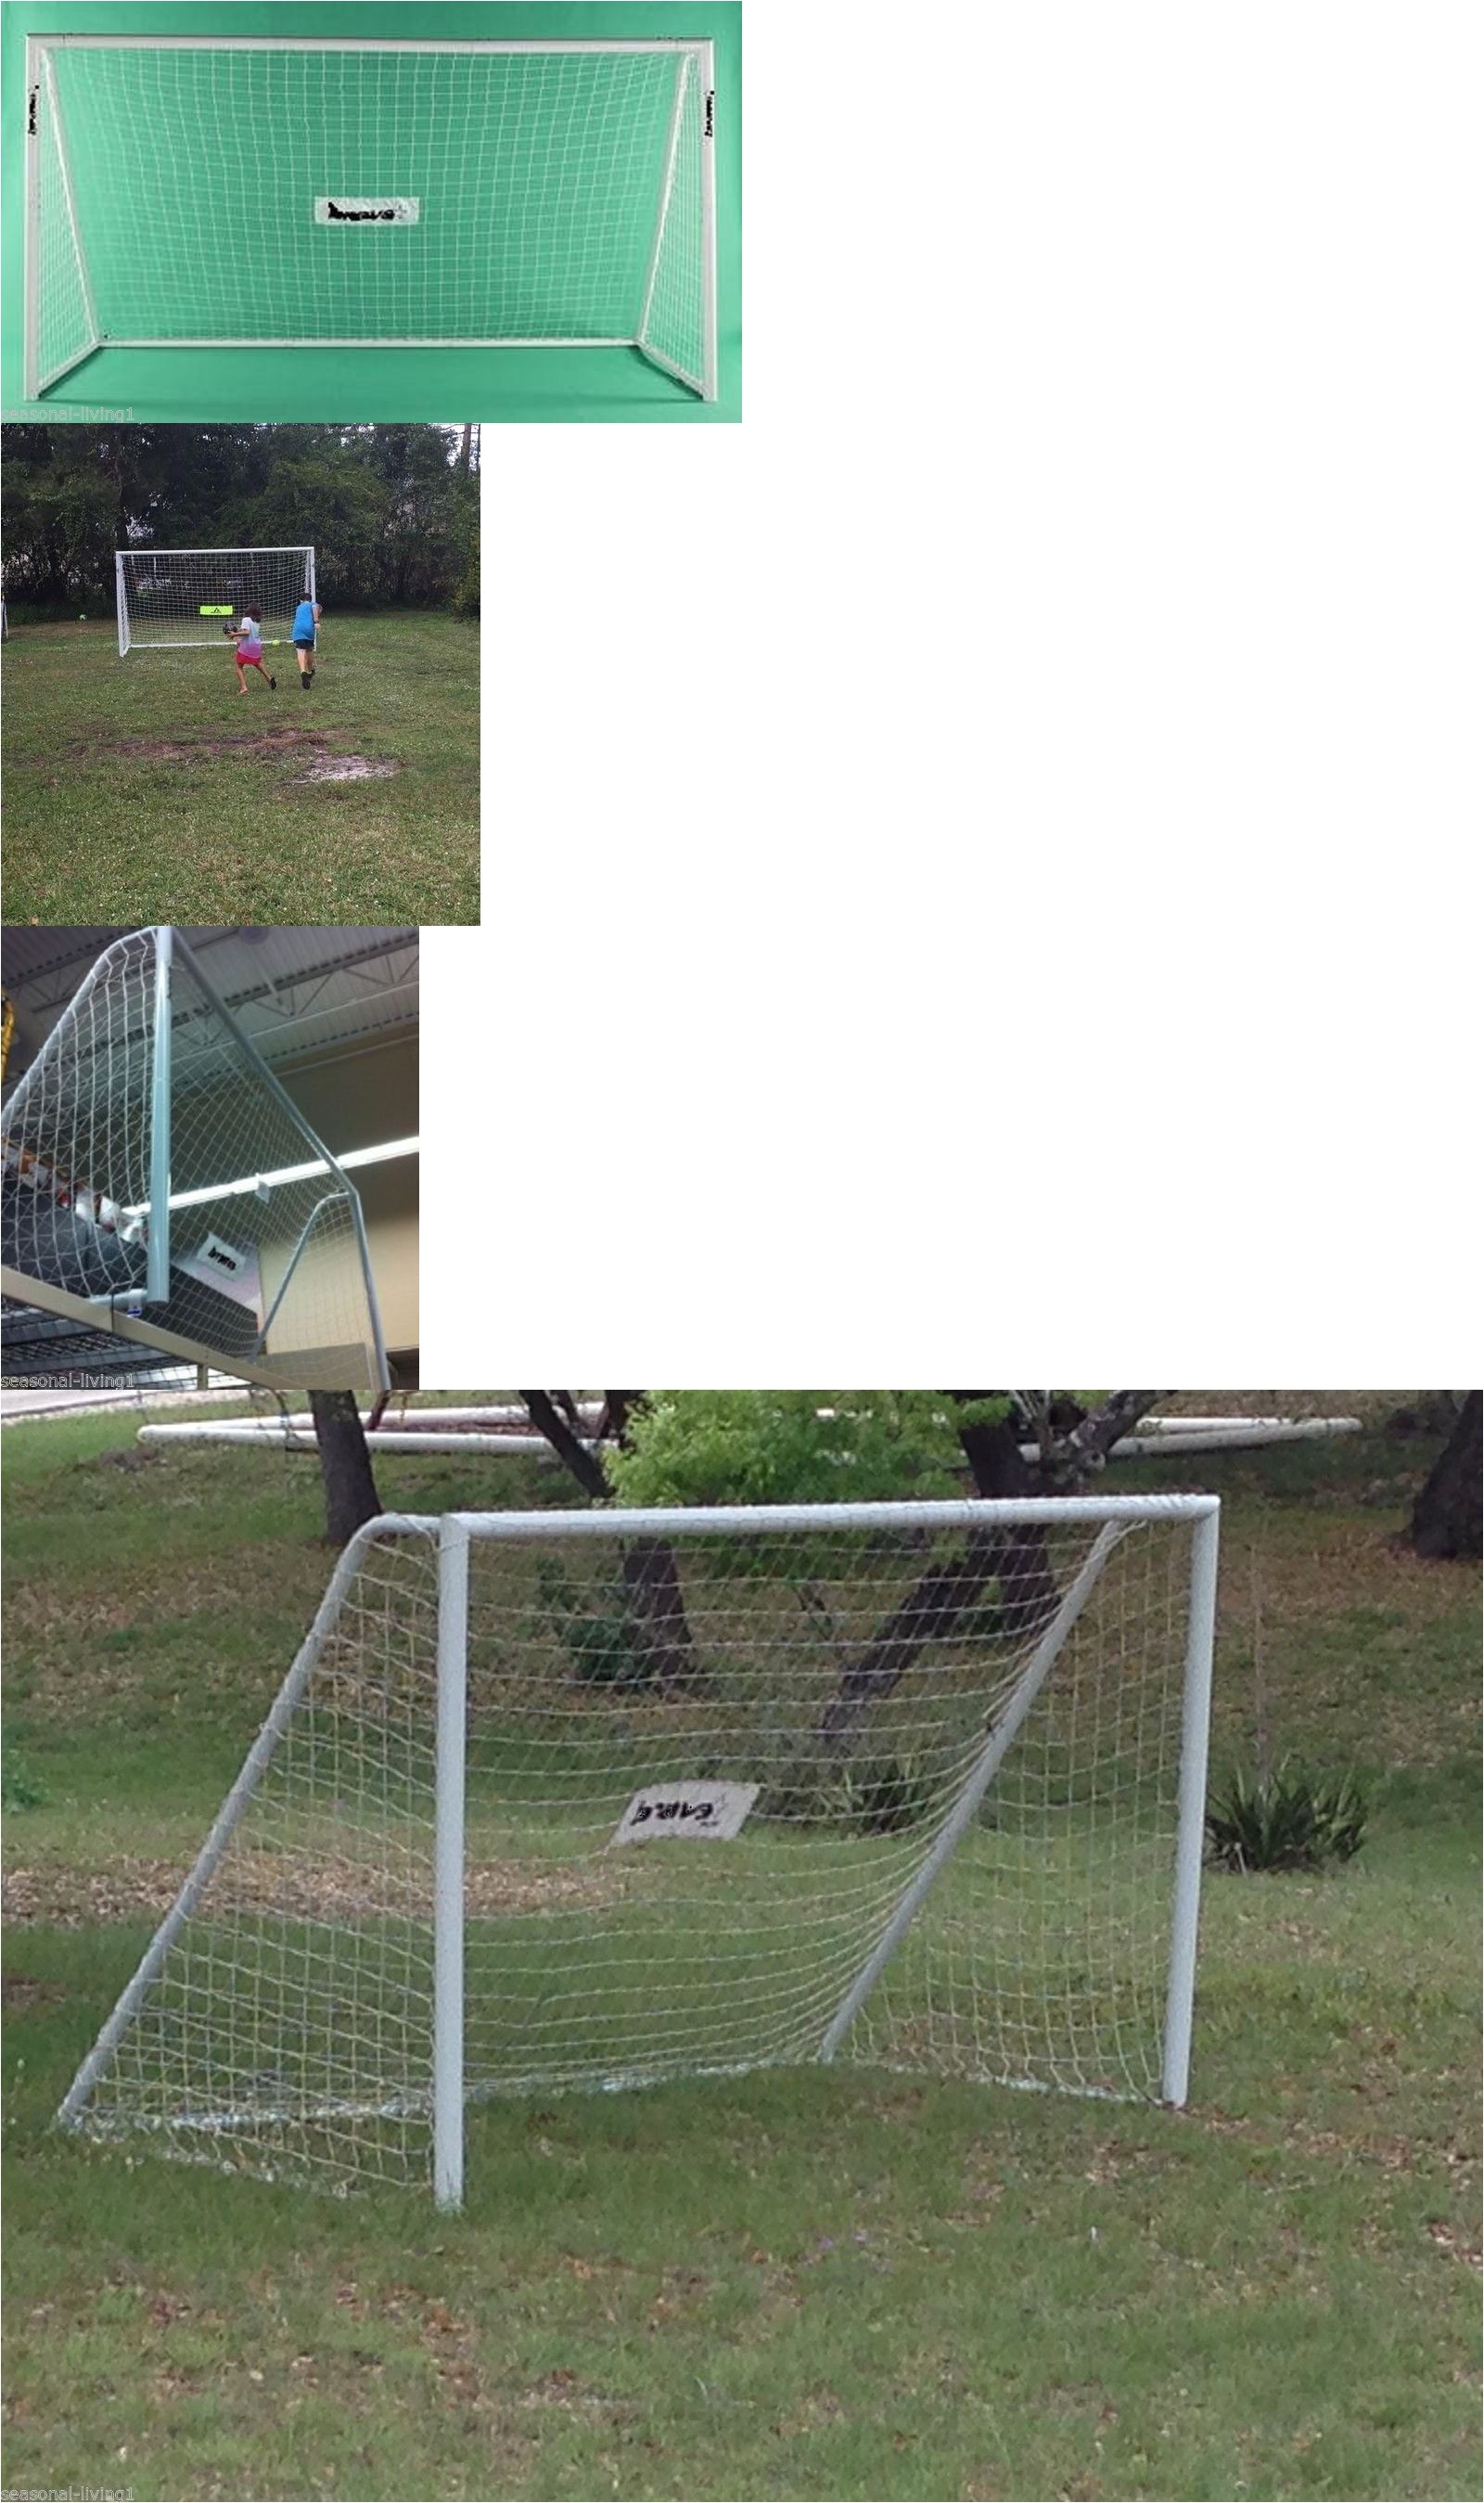 goals and nets 159180 clearance all steel no pvc 12 x 6 5 a· soccer goals